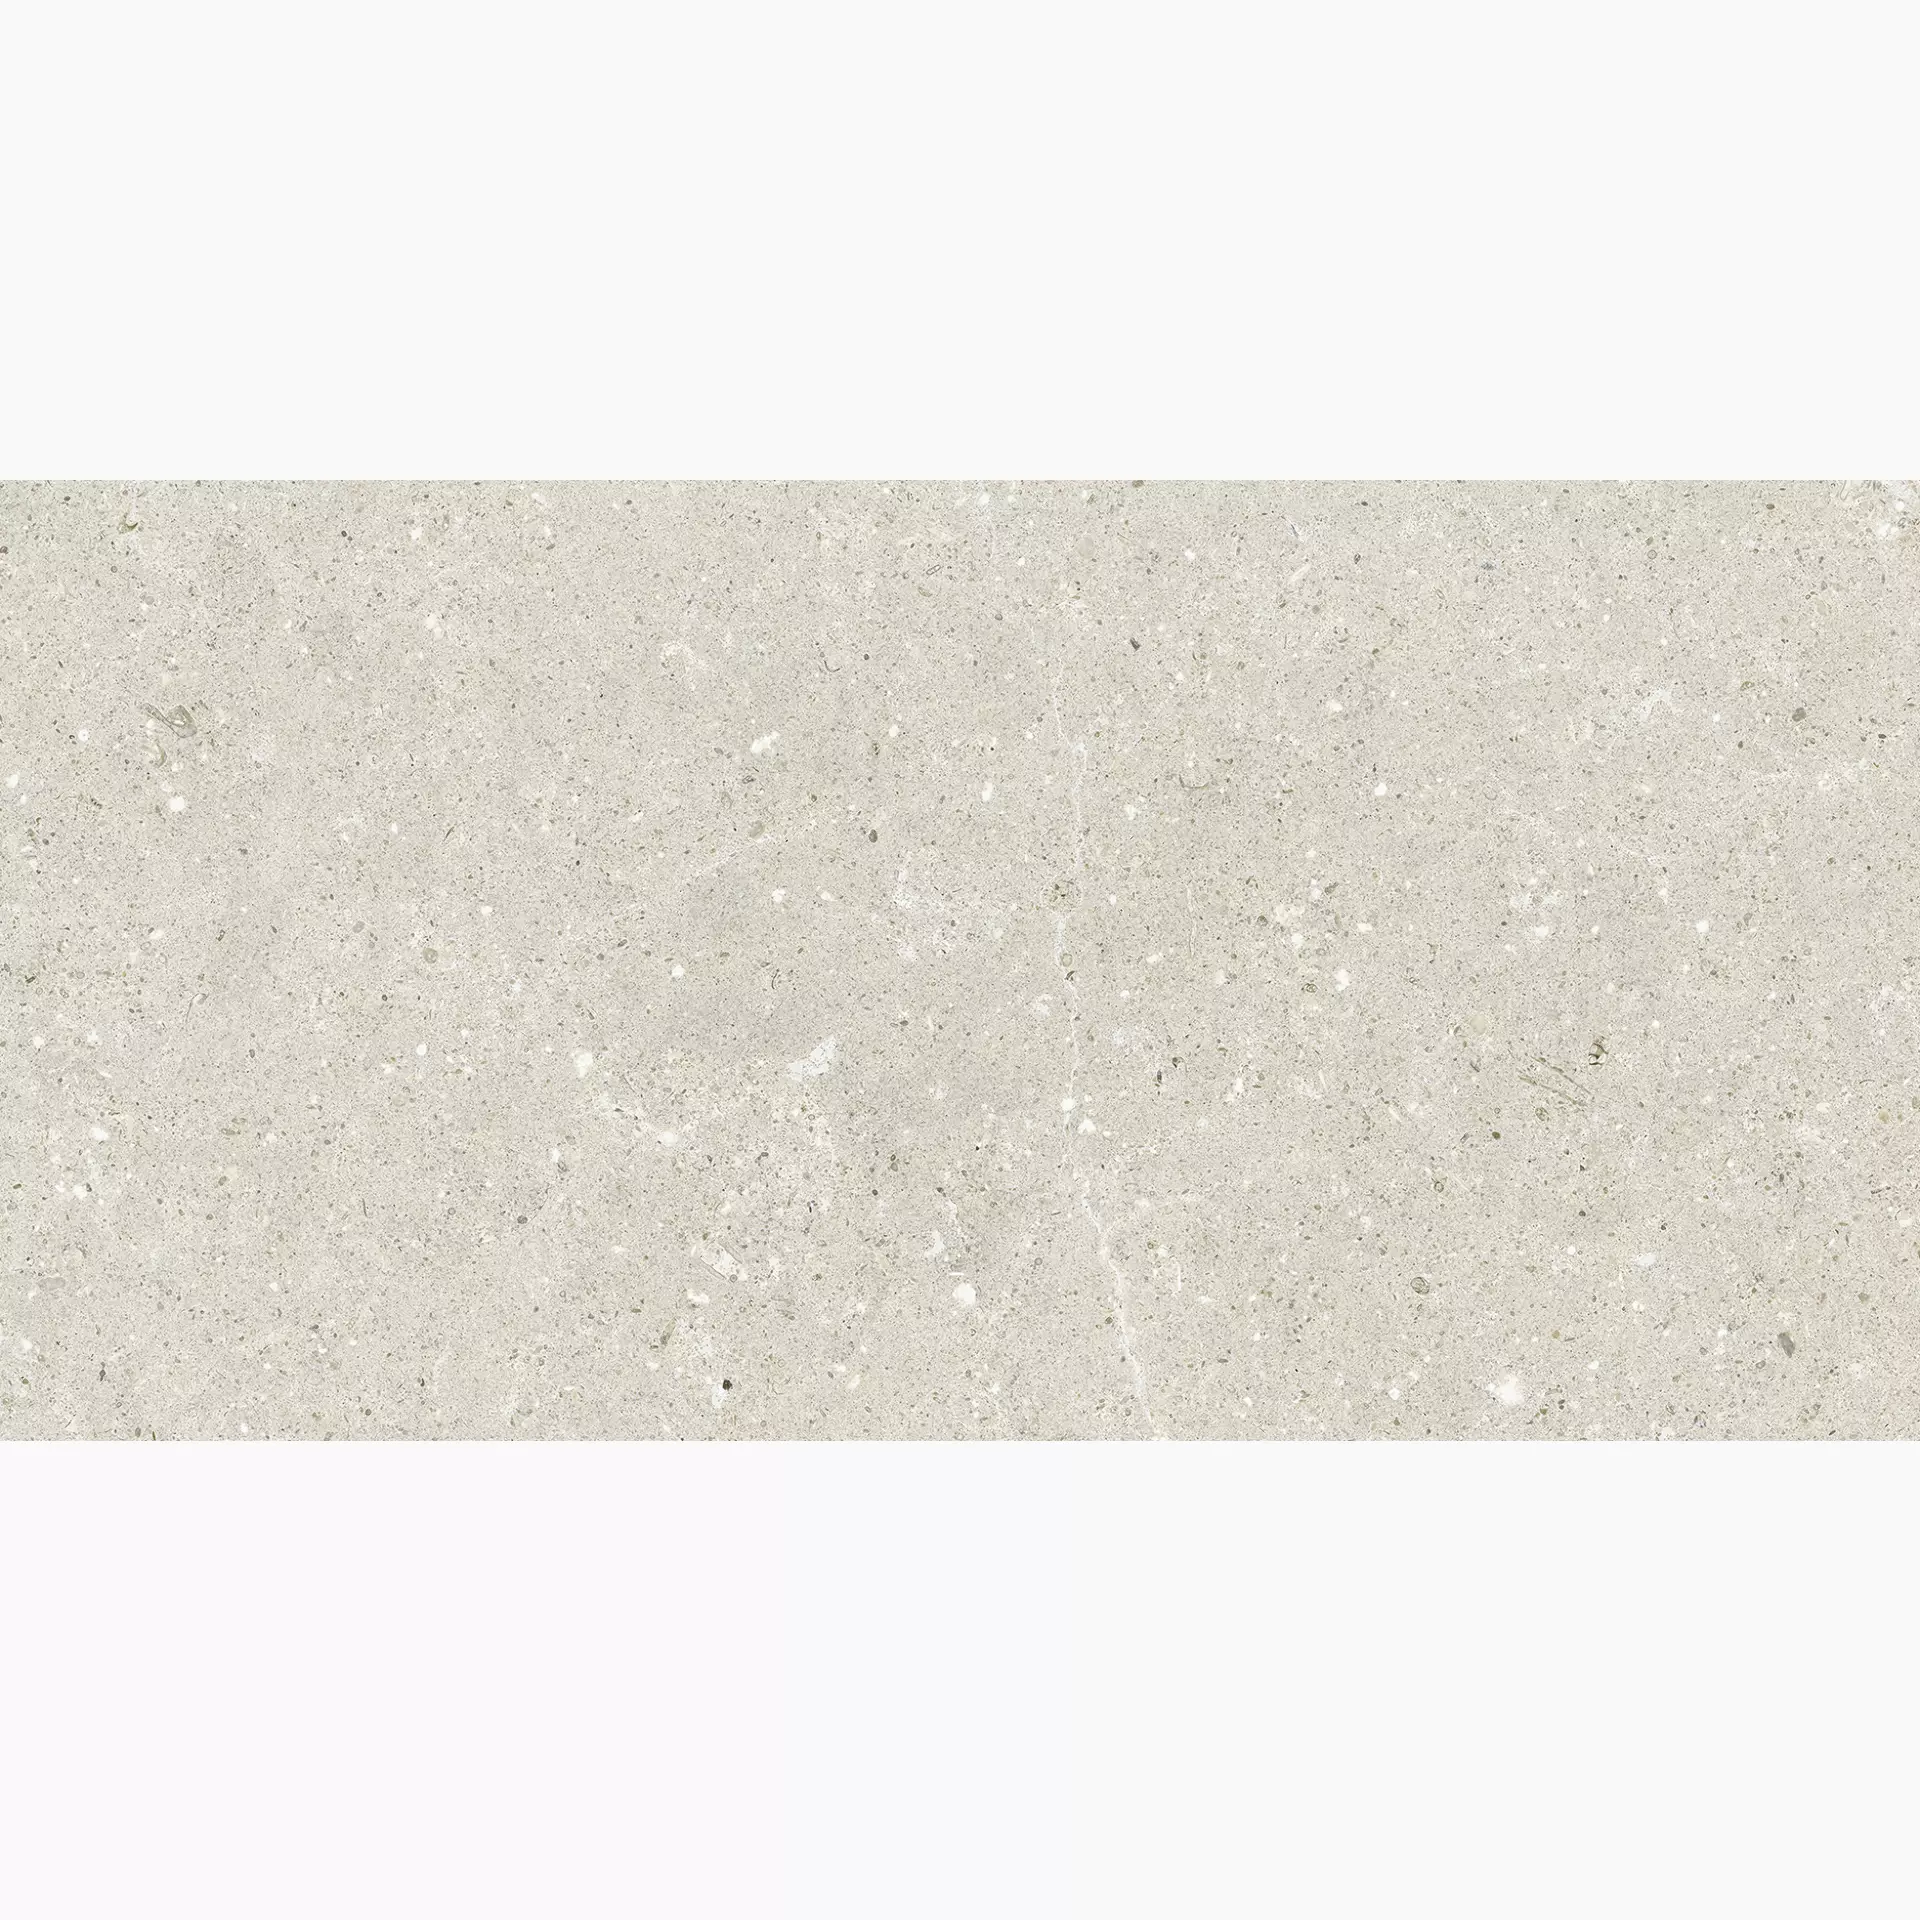 Del Conca Hwd Wild White Hwd Naturale GRWD10R 120x120cm rectified 8,5mm